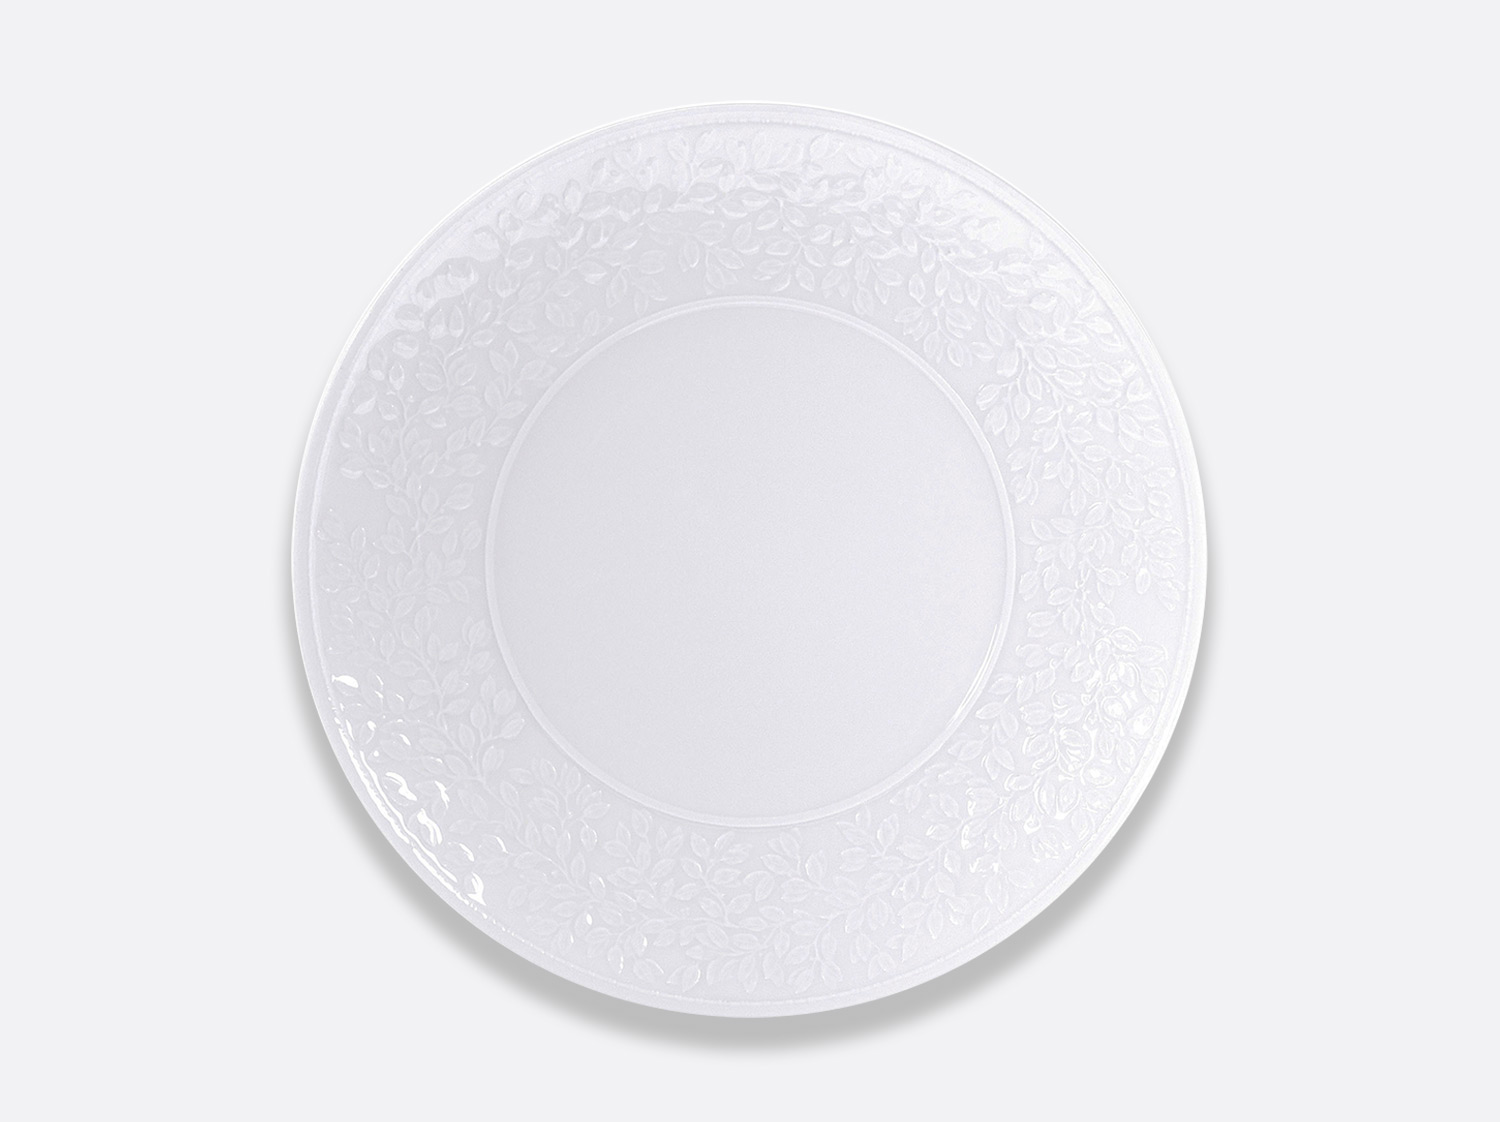 China Service plate 12.2" of the collection Louvre | Bernardaud